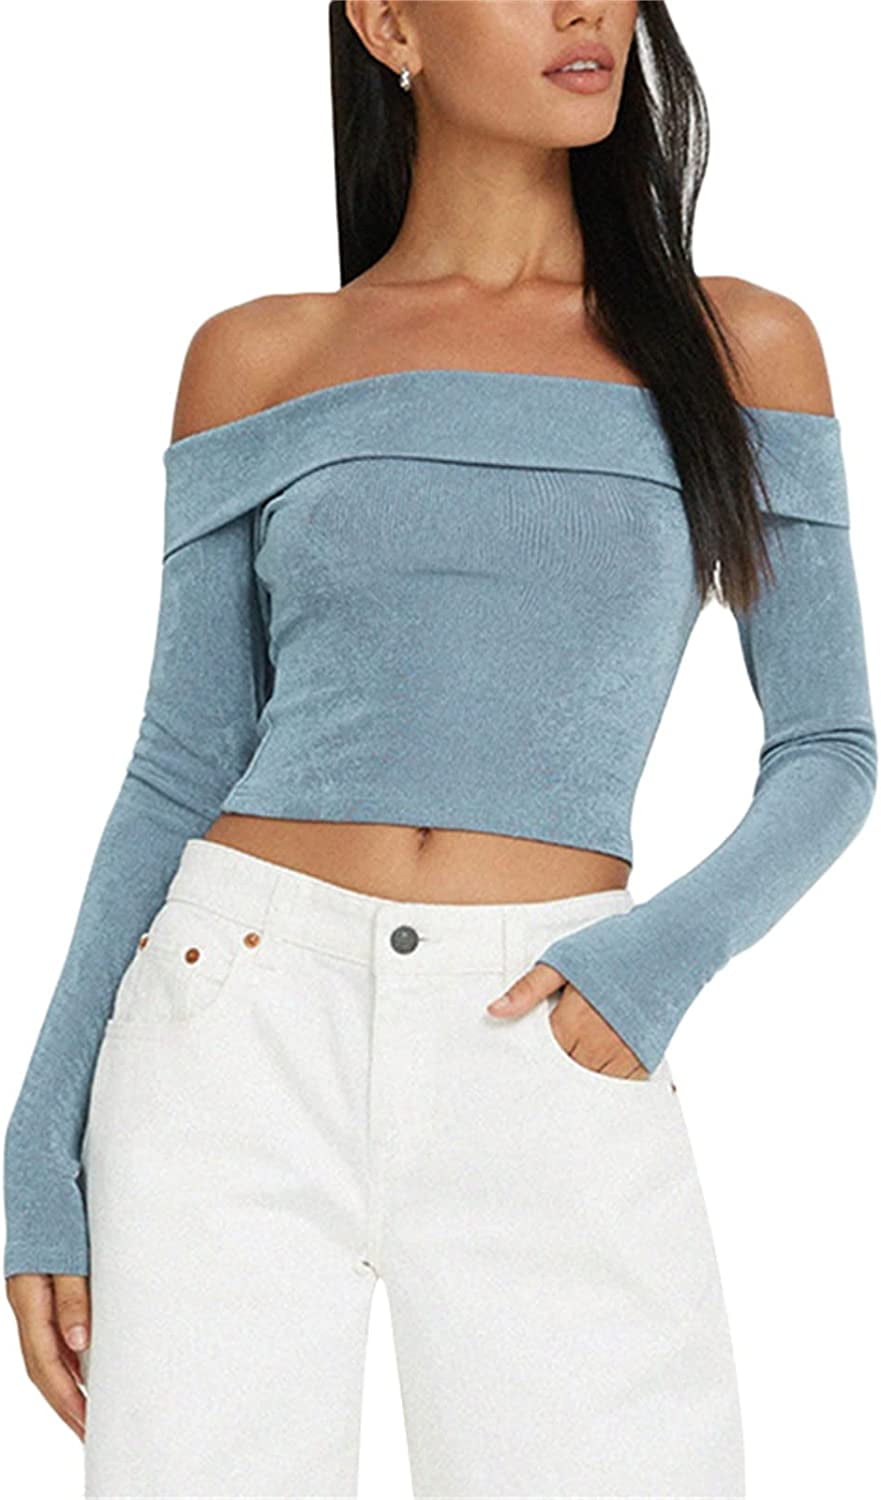 Women's Crop Tops Sexy Knit Mesh Sheer See Through Off Shoulder Long Sleeve  t Slim Fit Y2K Crop Tops Skinny Club Party Shirts (as1, Alpha, x_s,  Regular, Regular, Apricot) at  Women's